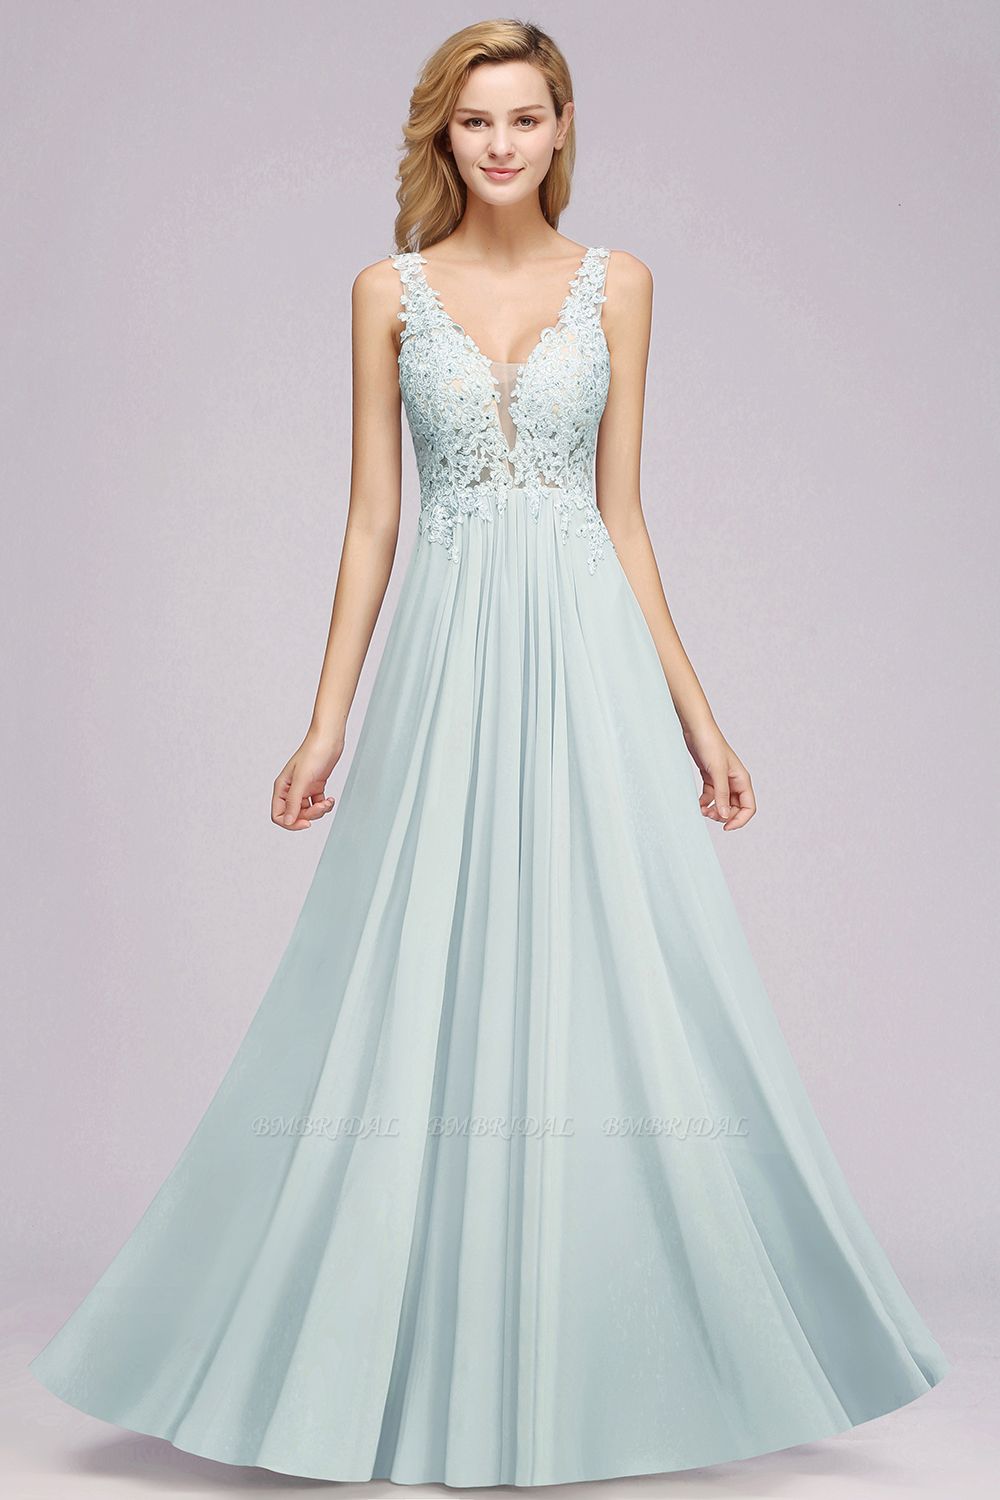 https://www.bmbridal.com/v-neck-lace-bridesmaid-dress-with-beadings-g358?cate_2=38